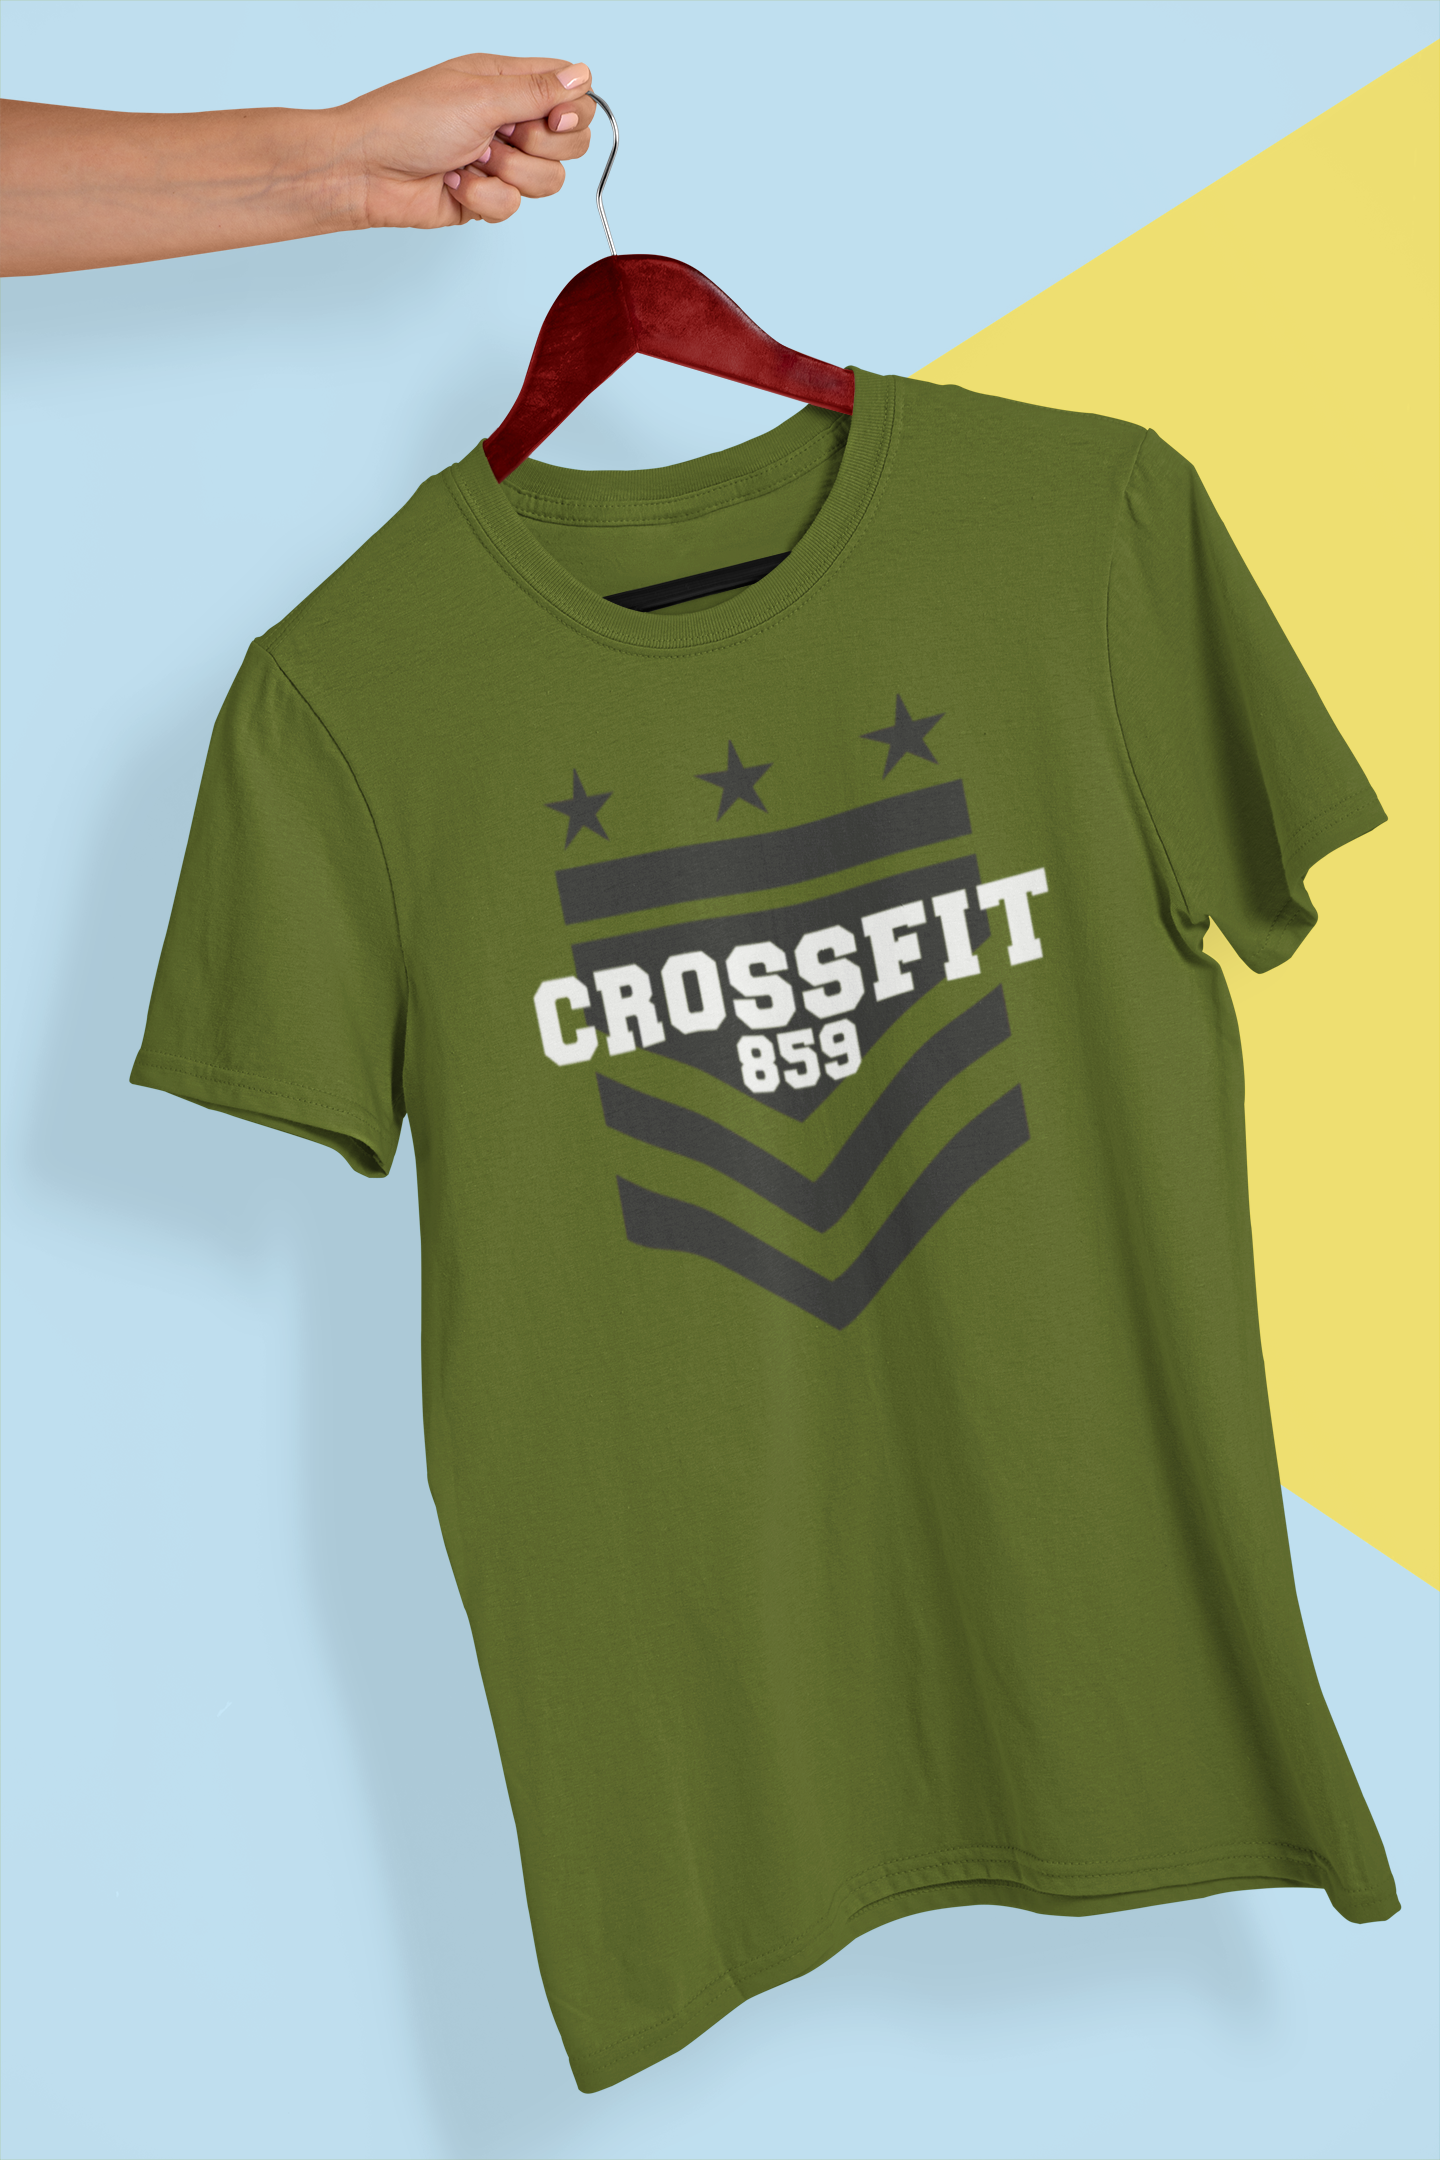 Crossfit - Gym T Shirt Strong Soul Shirts & Tops